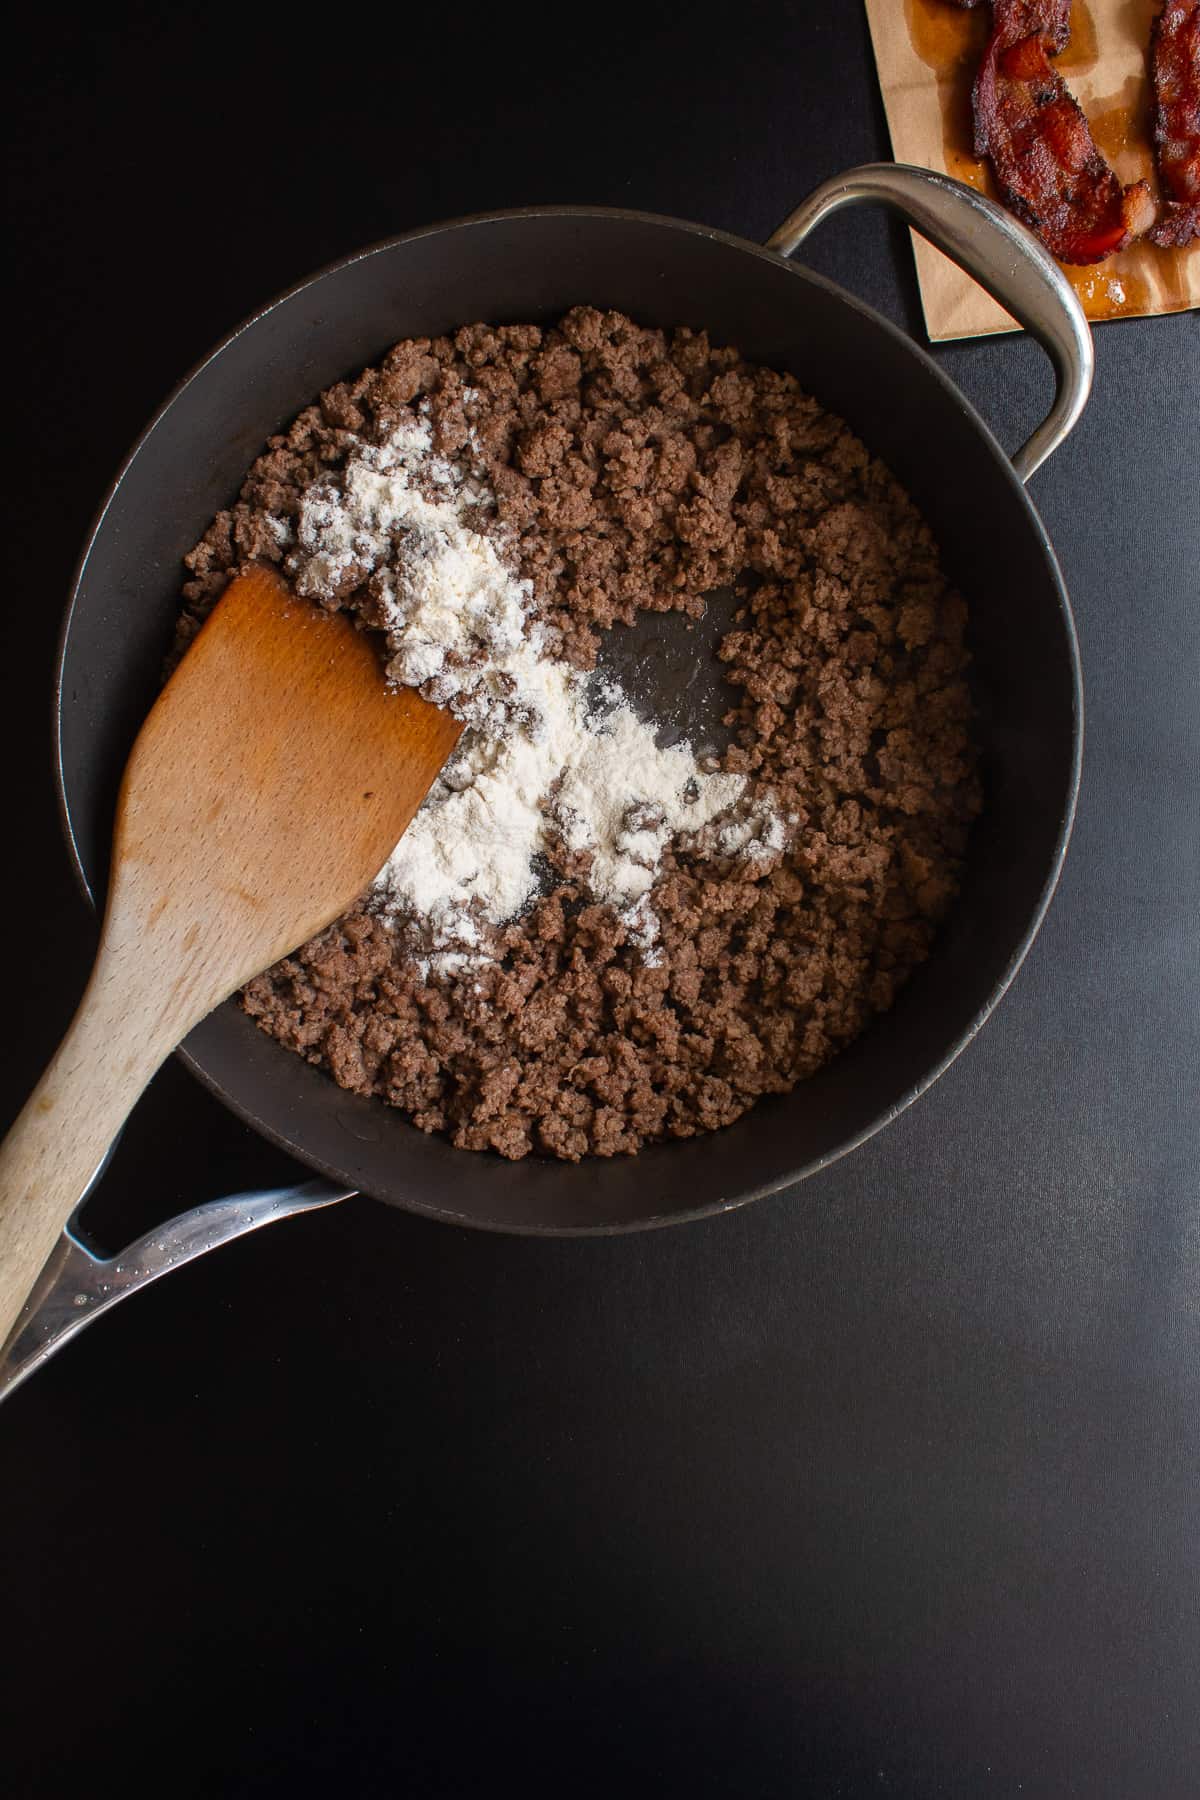 Flour added to the browned ground beef in a skillet.